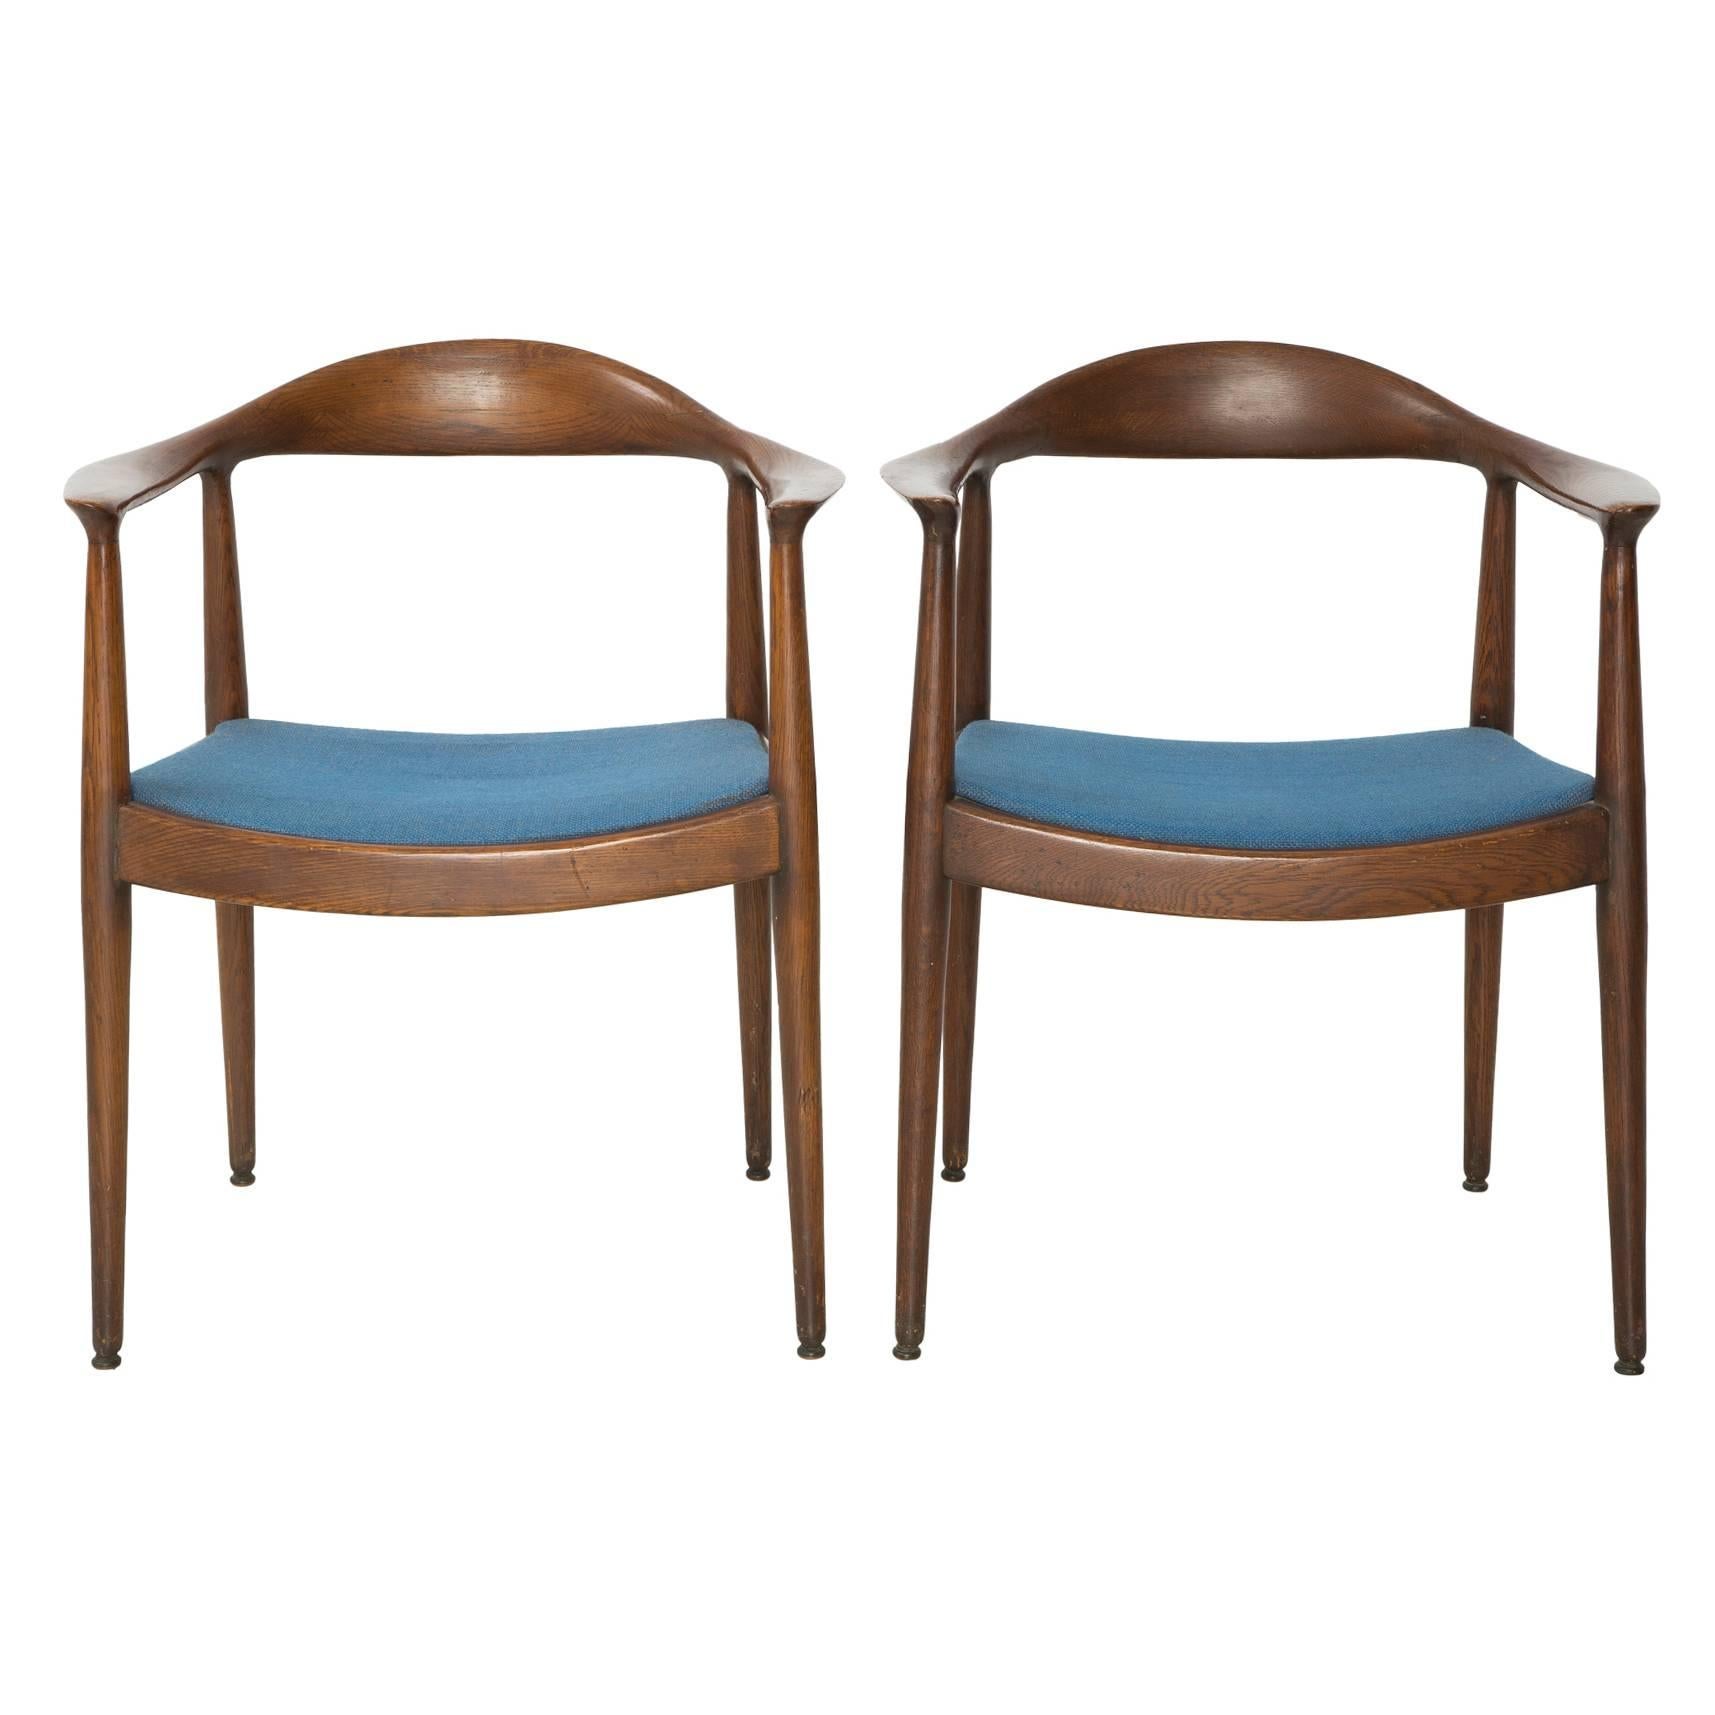 Pair of Blue Danish Modern Chairs Attributed to "The Chair" Hans Wegner